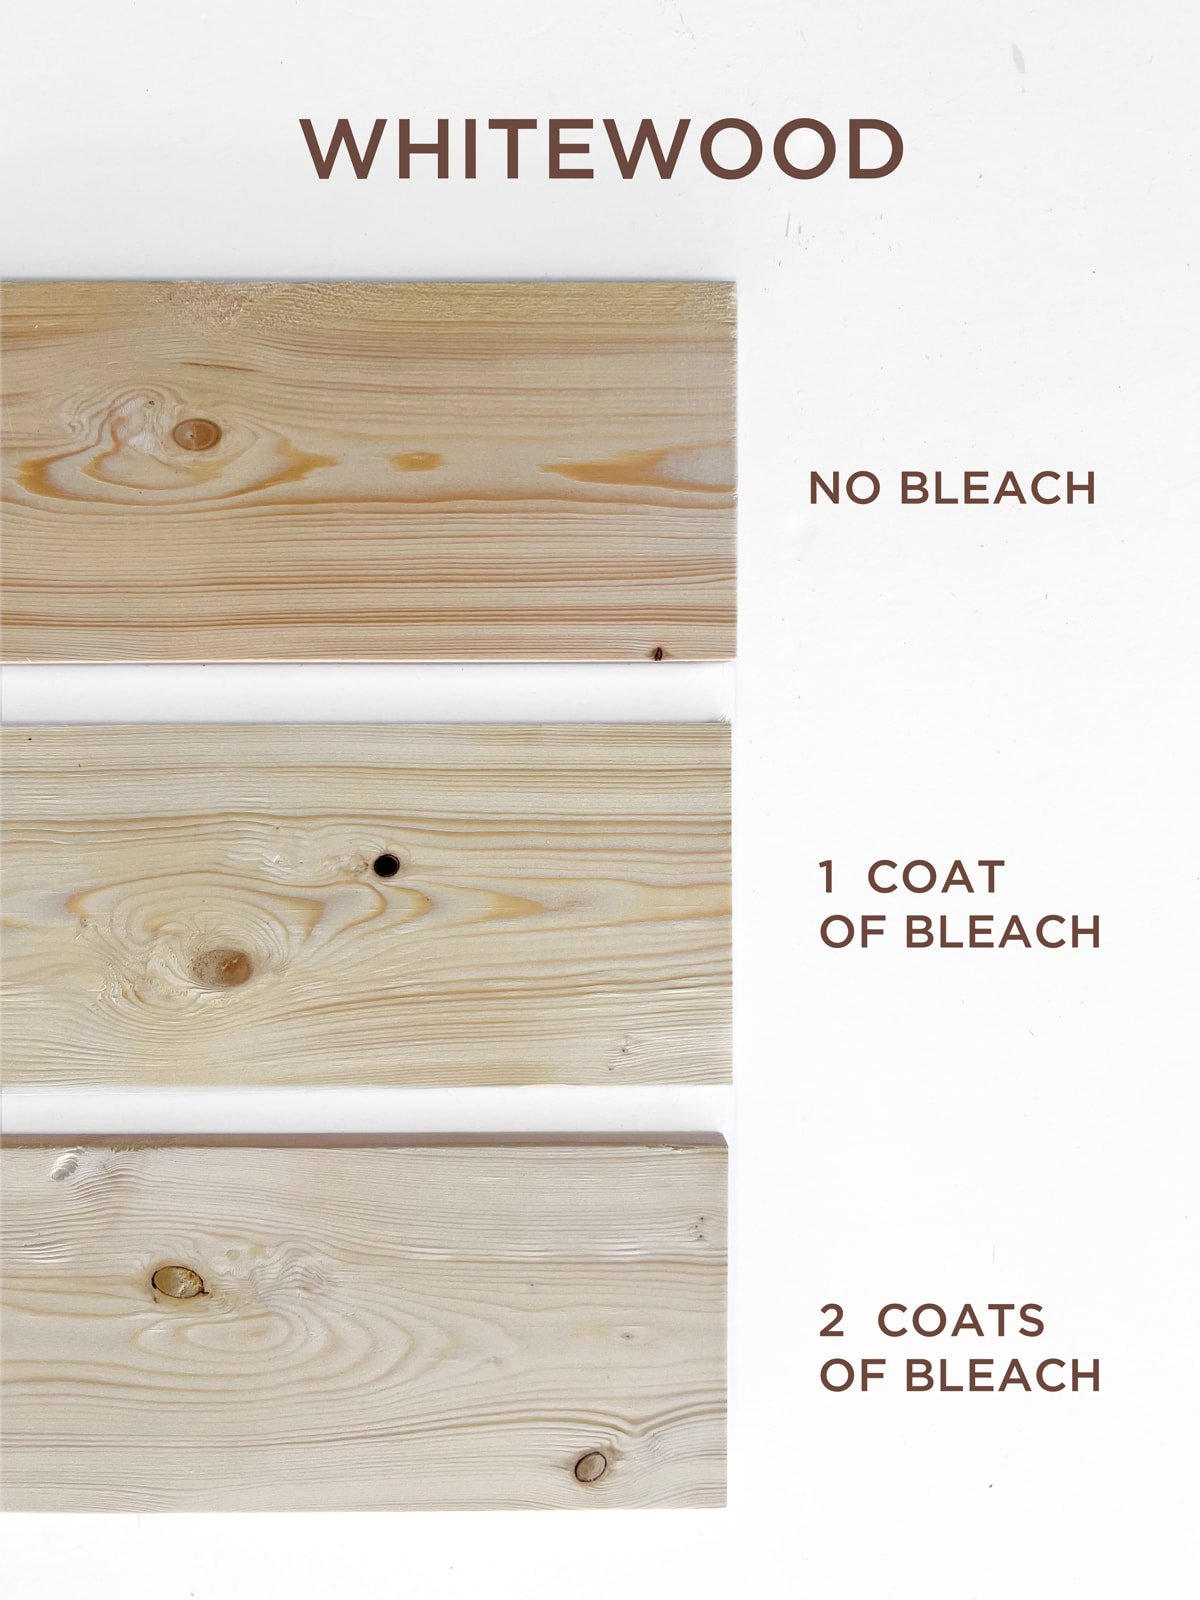 how to bleach whitewood test